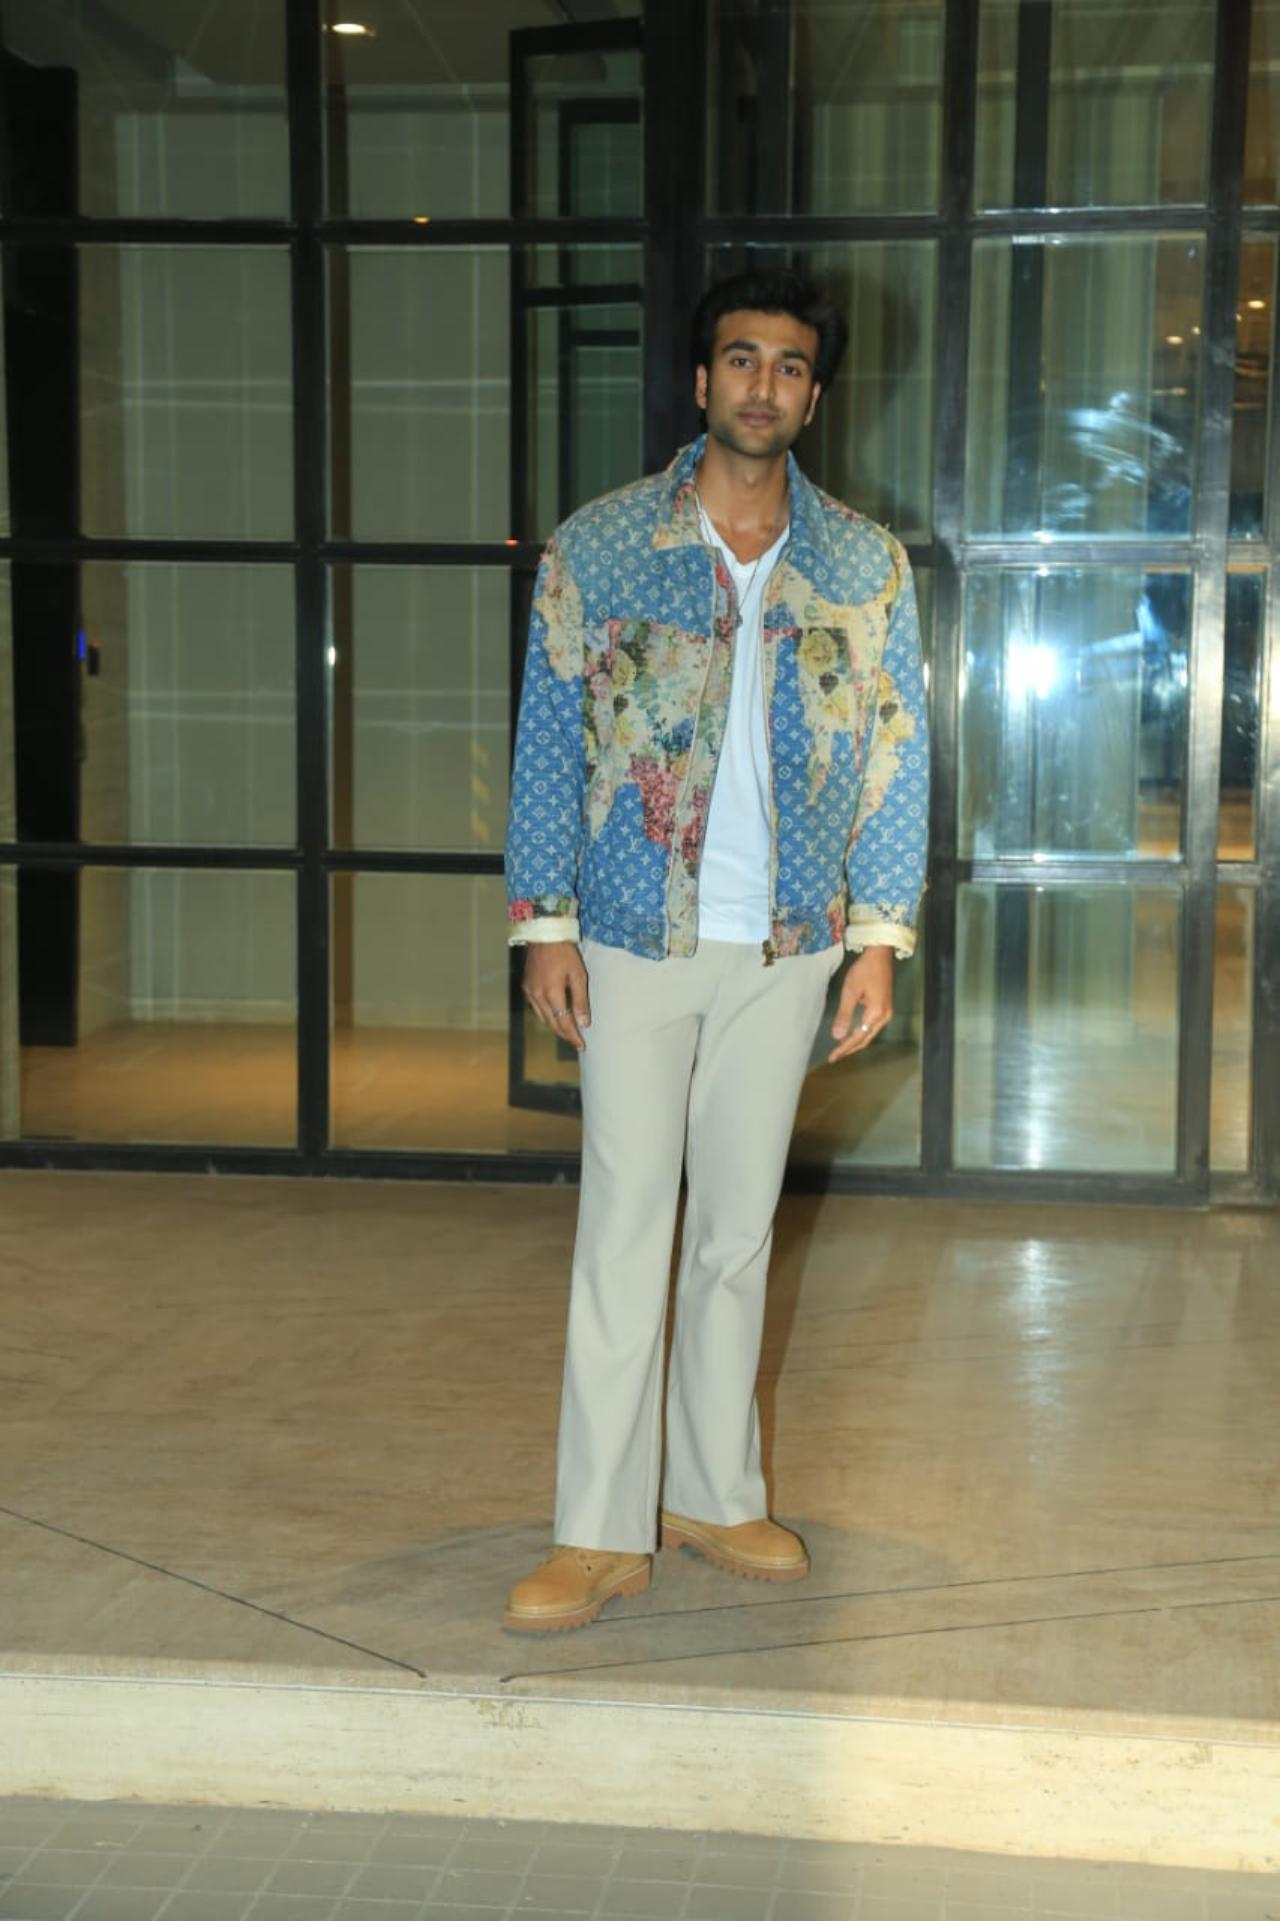 Meezaan Jafri was seen in a printed shirt and white jeans